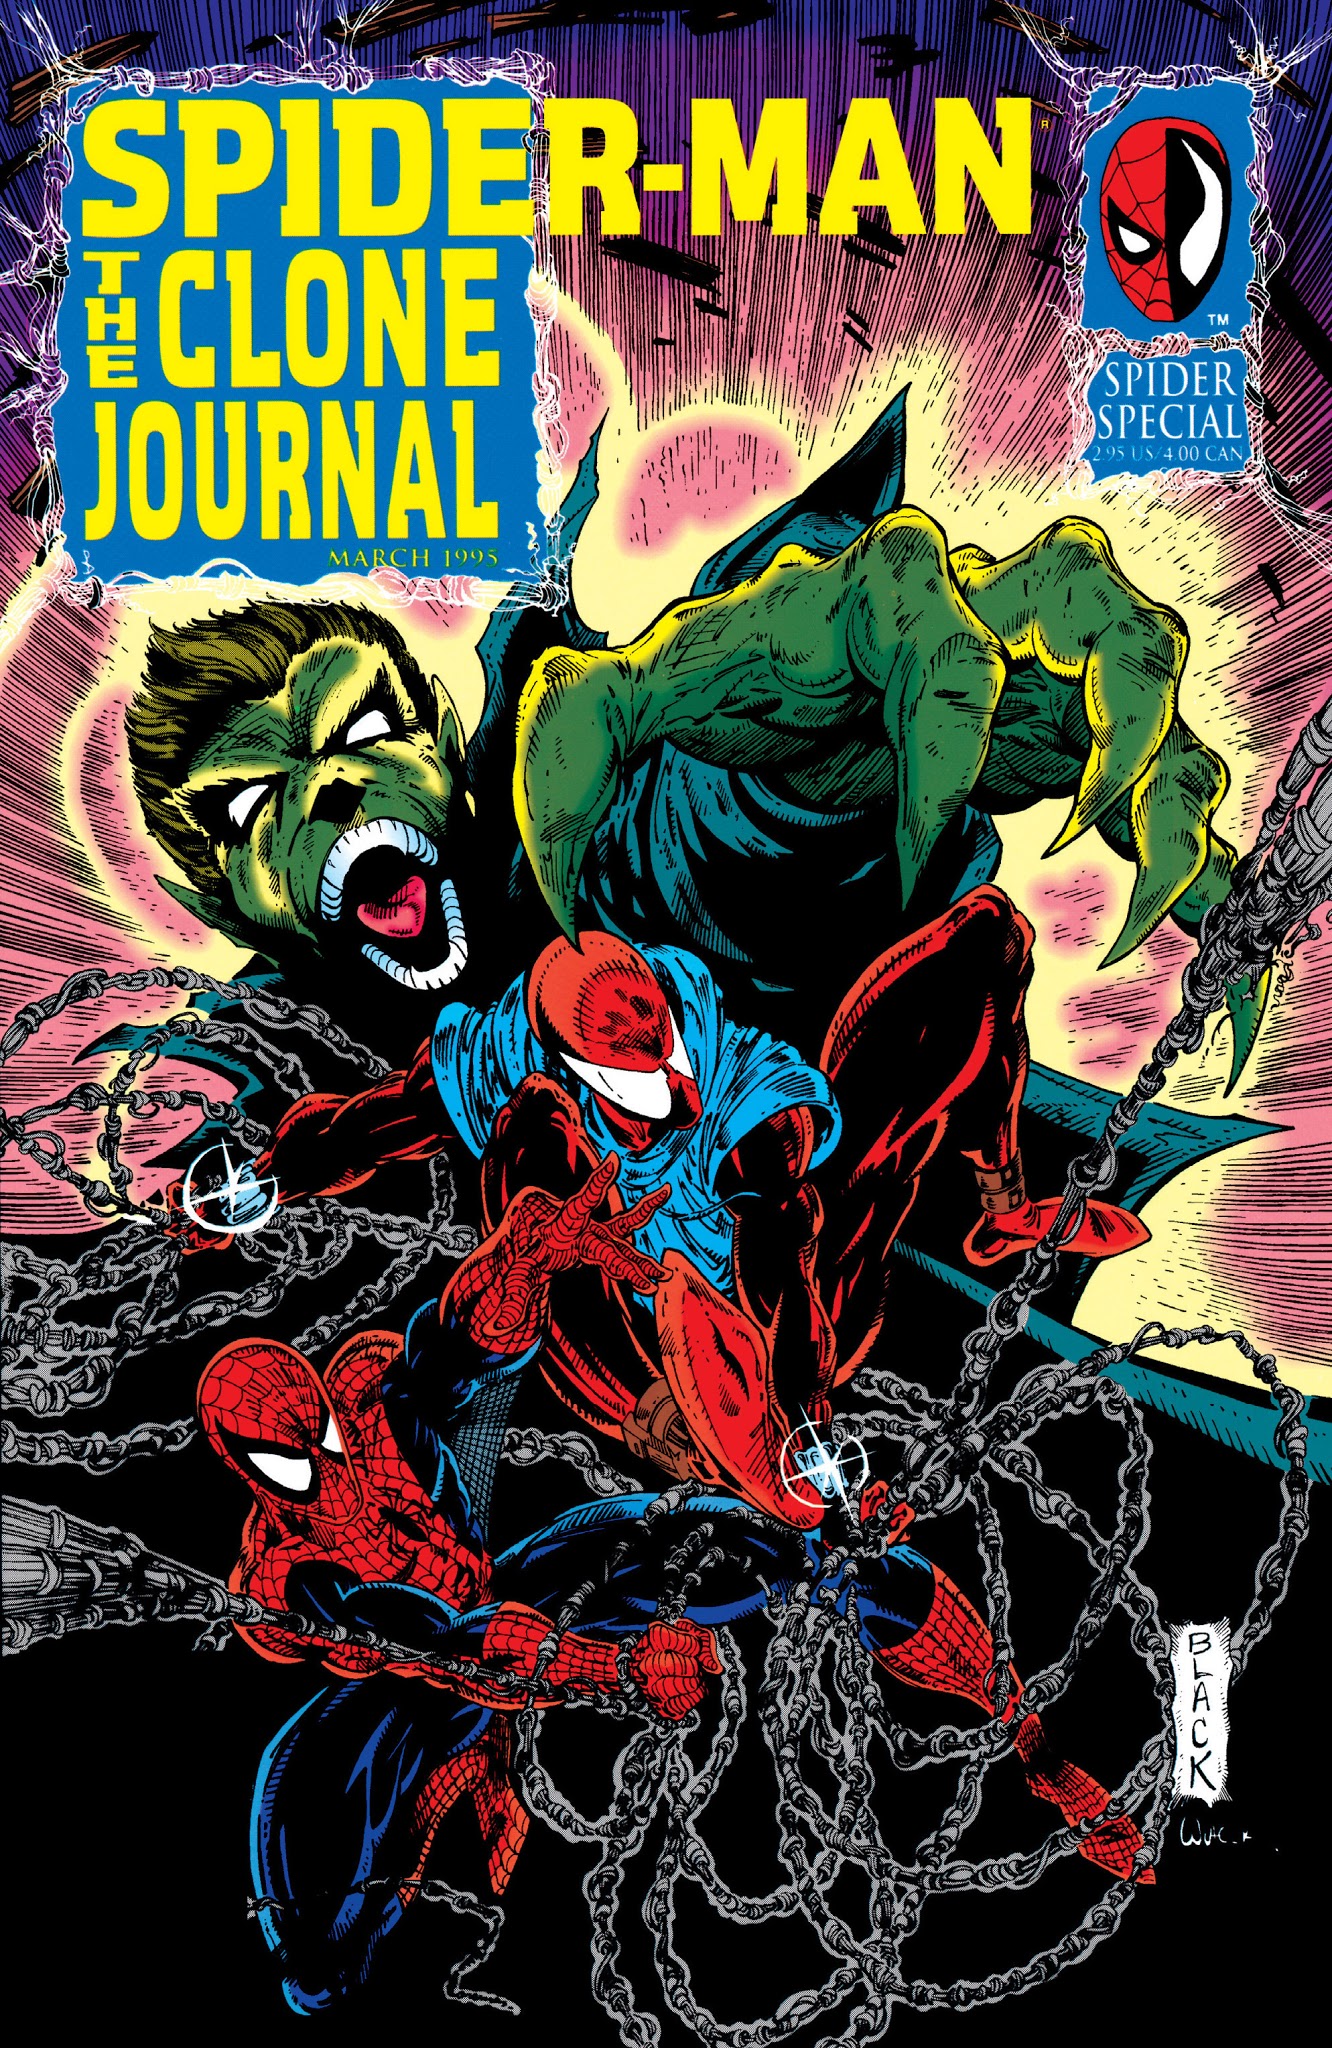 Read online Spider-Man: The Clone Journal comic -  Issue # Full - 1